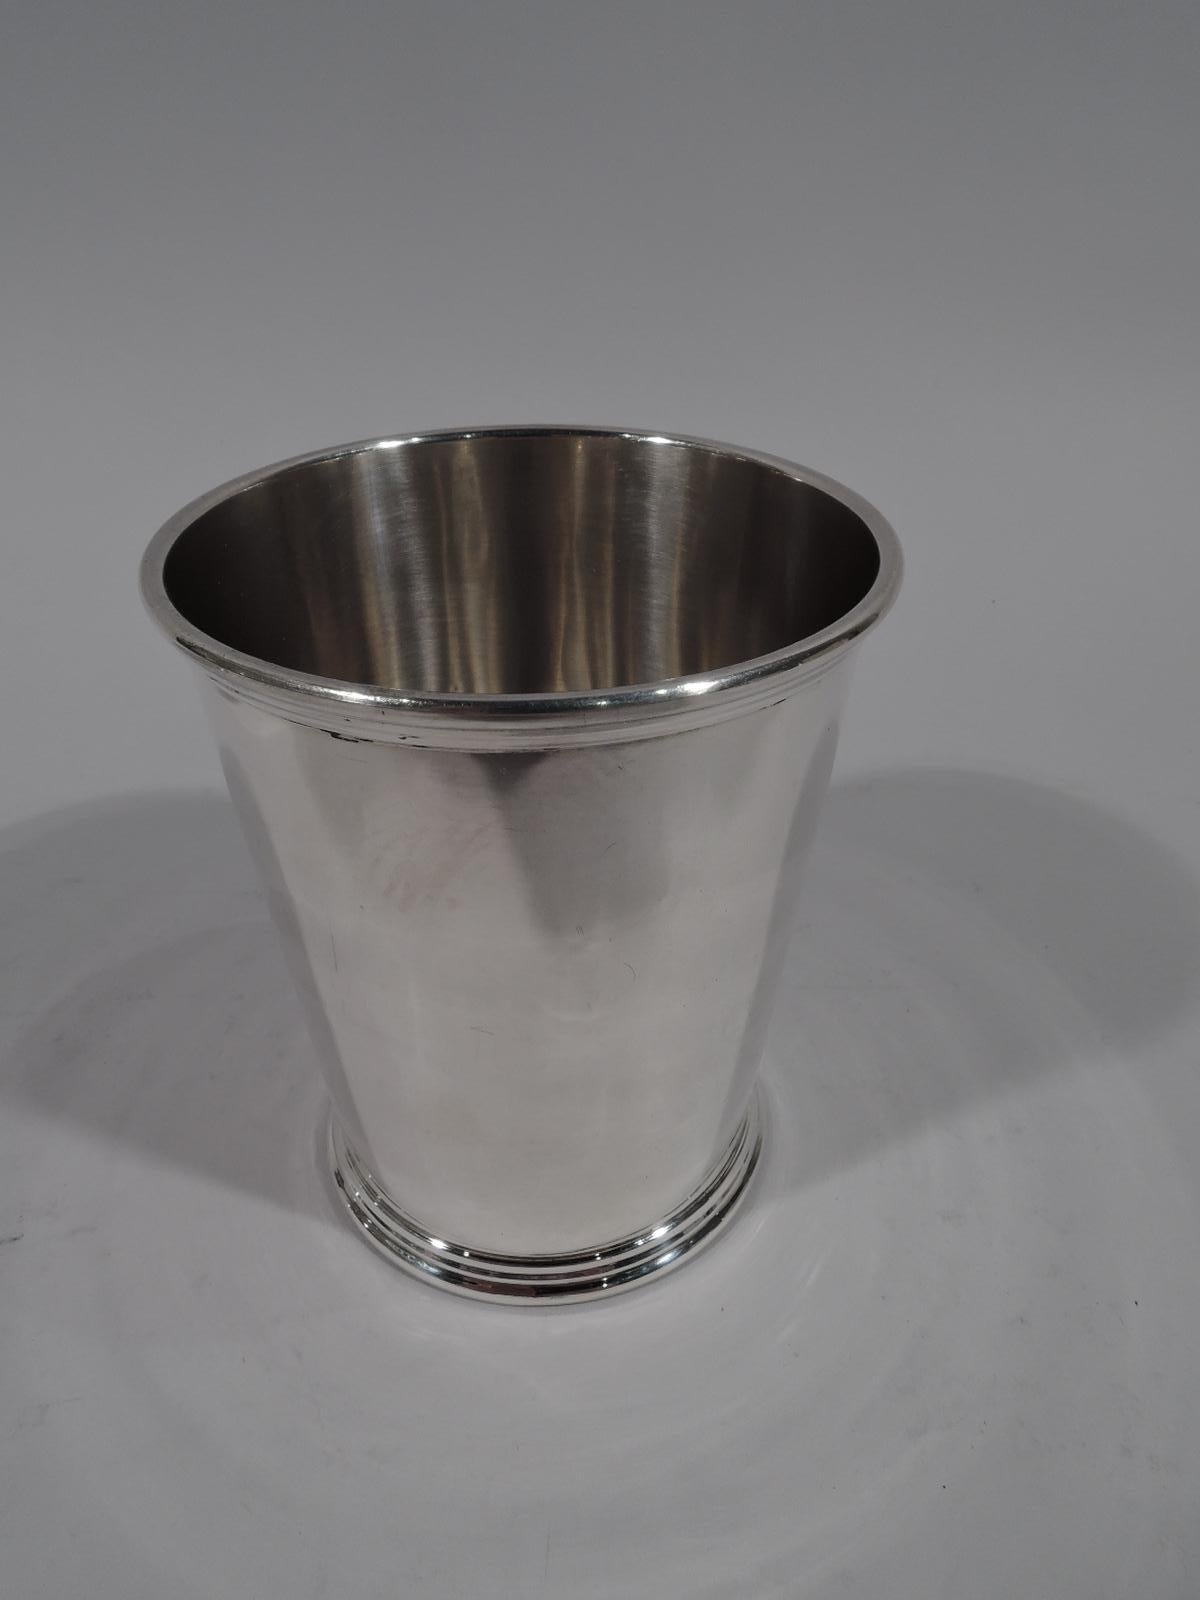 Pair of American sterling silver mint julep cups. Made by S. Kirk & Son in Baltimore. Each: Straight and tapering sides, ribbed rim, and skirted foot. Fully marked including maker’s stamp (1932-61) and no. 277. Total weight: 7.5 troy ounces.